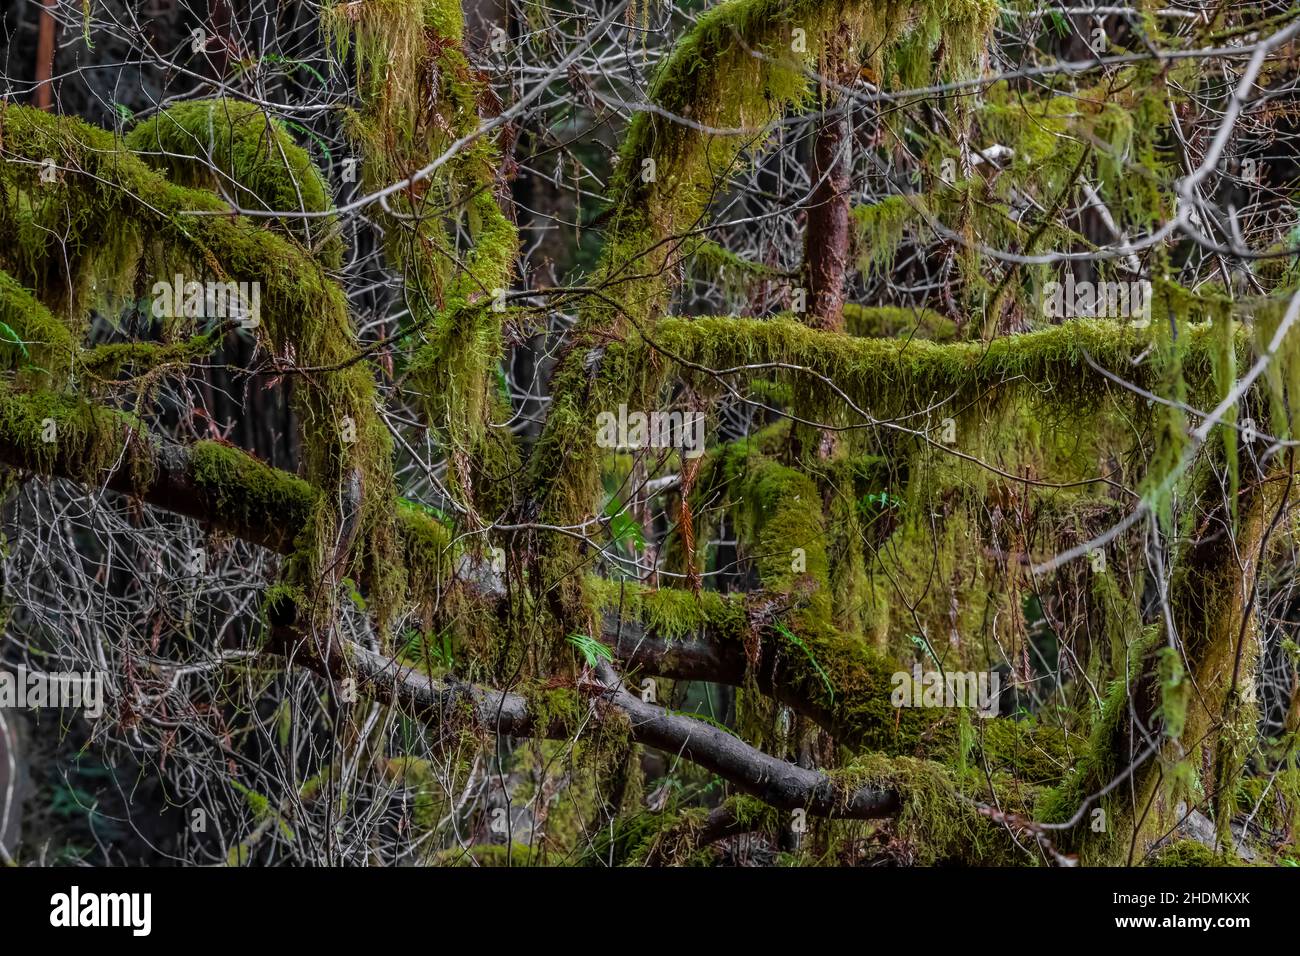 Acero Mossy a Stout Memorial Grove in Jedediah Smith Redwoods state Park in Redwood National and state Parks, California, USA Foto Stock